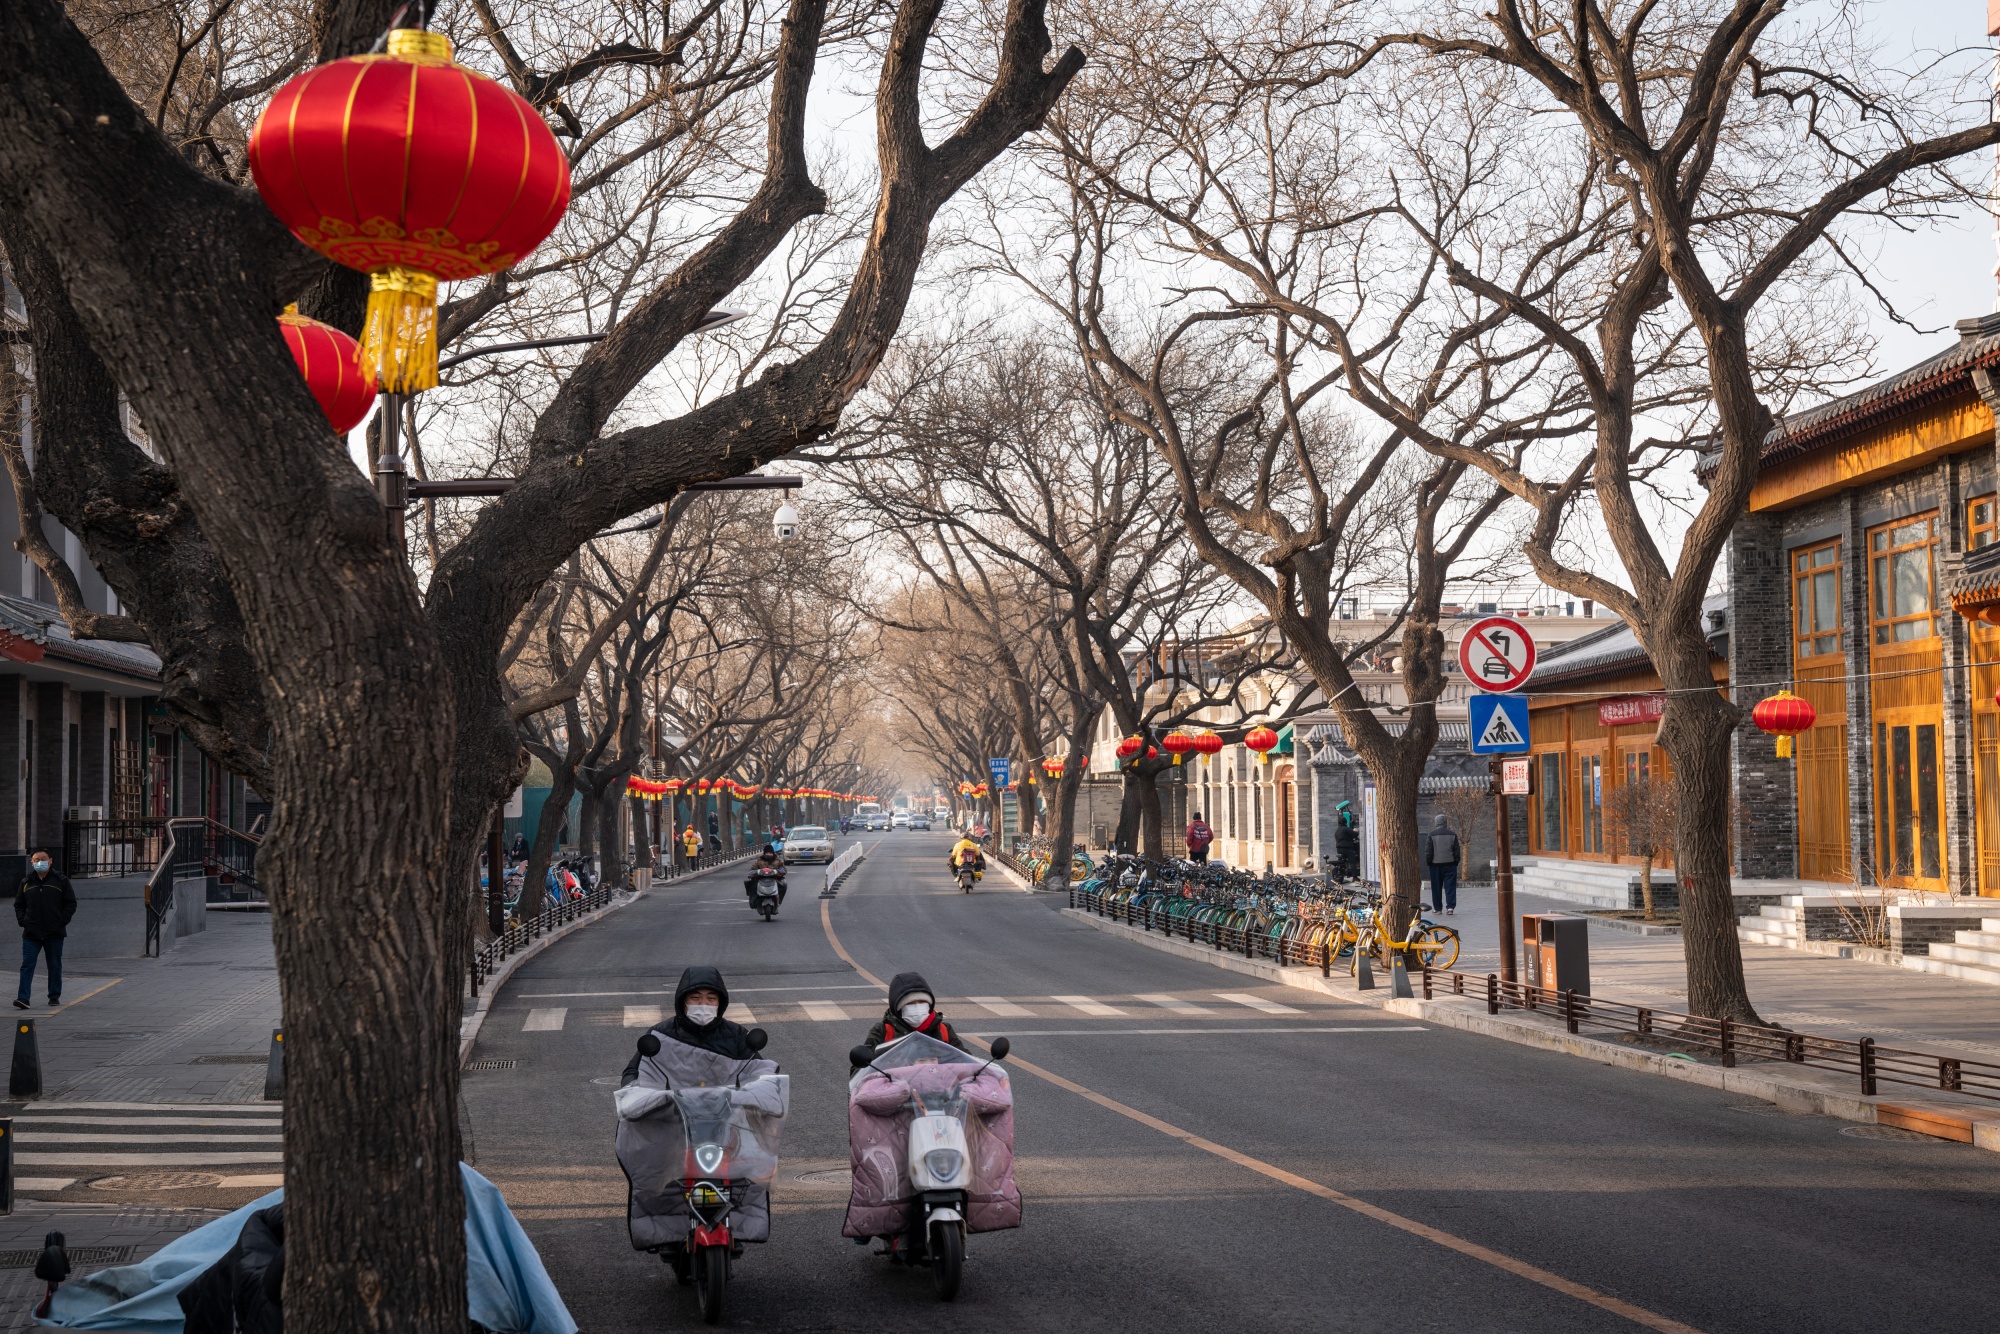 Beijing Covid Measures As City Sets GDP Growth Target At Over 6% for 2021